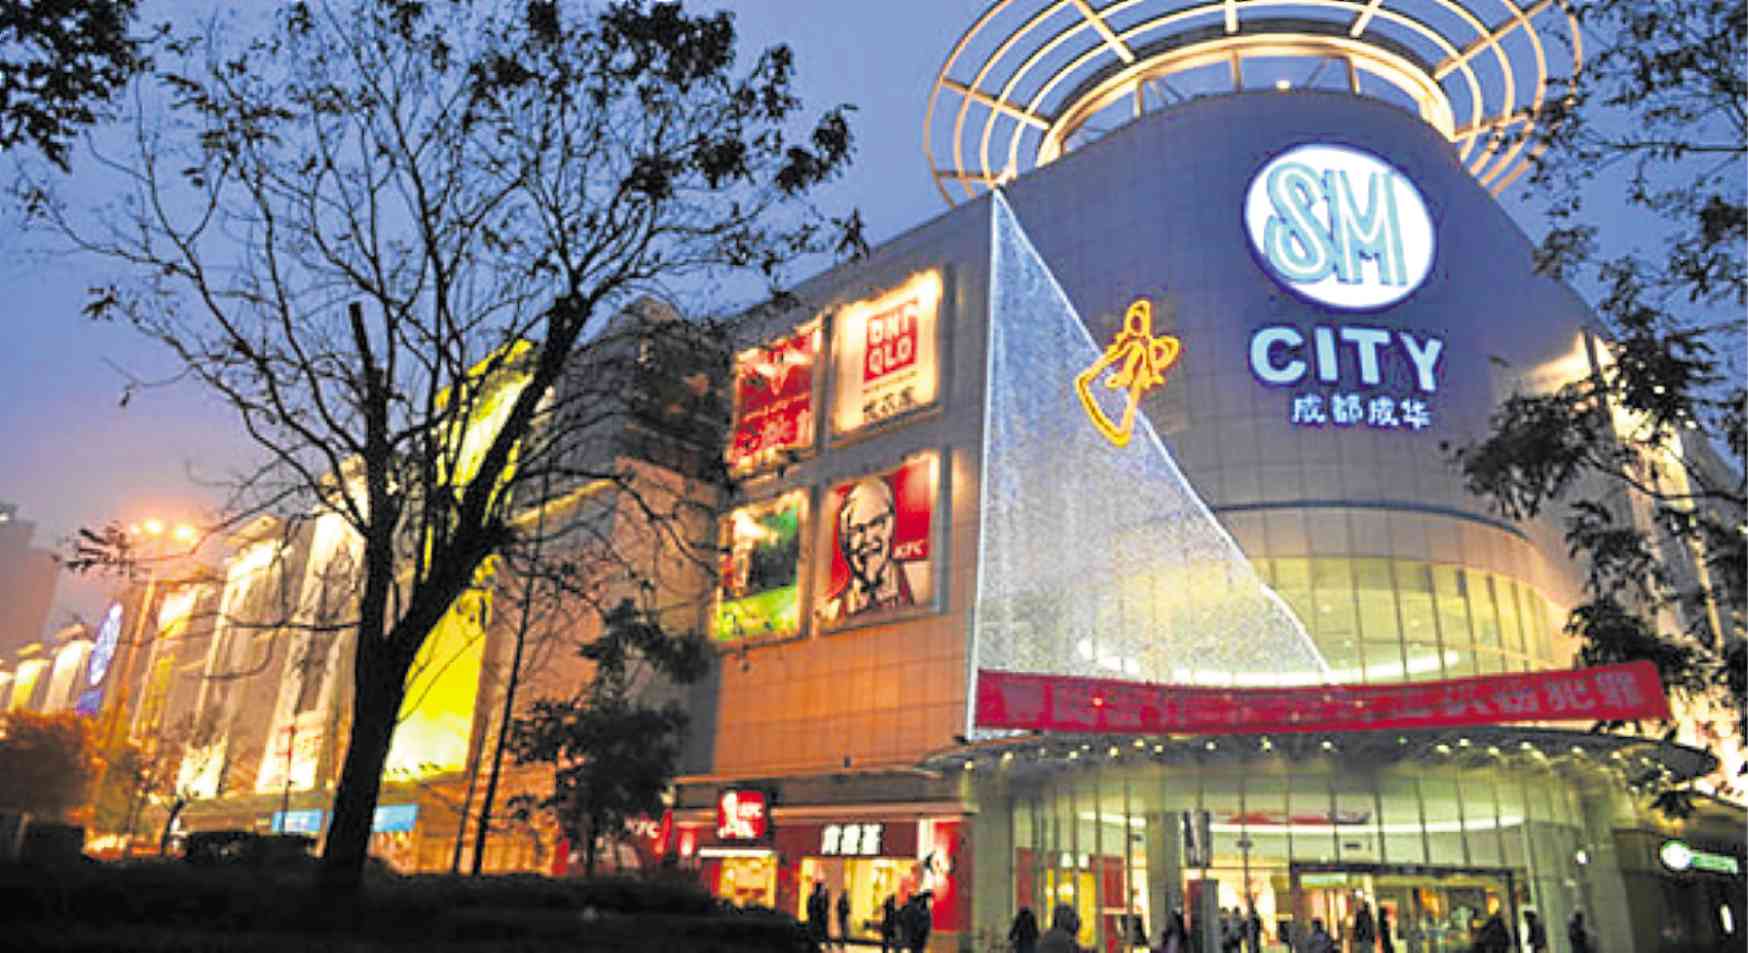 SM City mall in Chengdu, China —CONTRIBUTED PHOTO